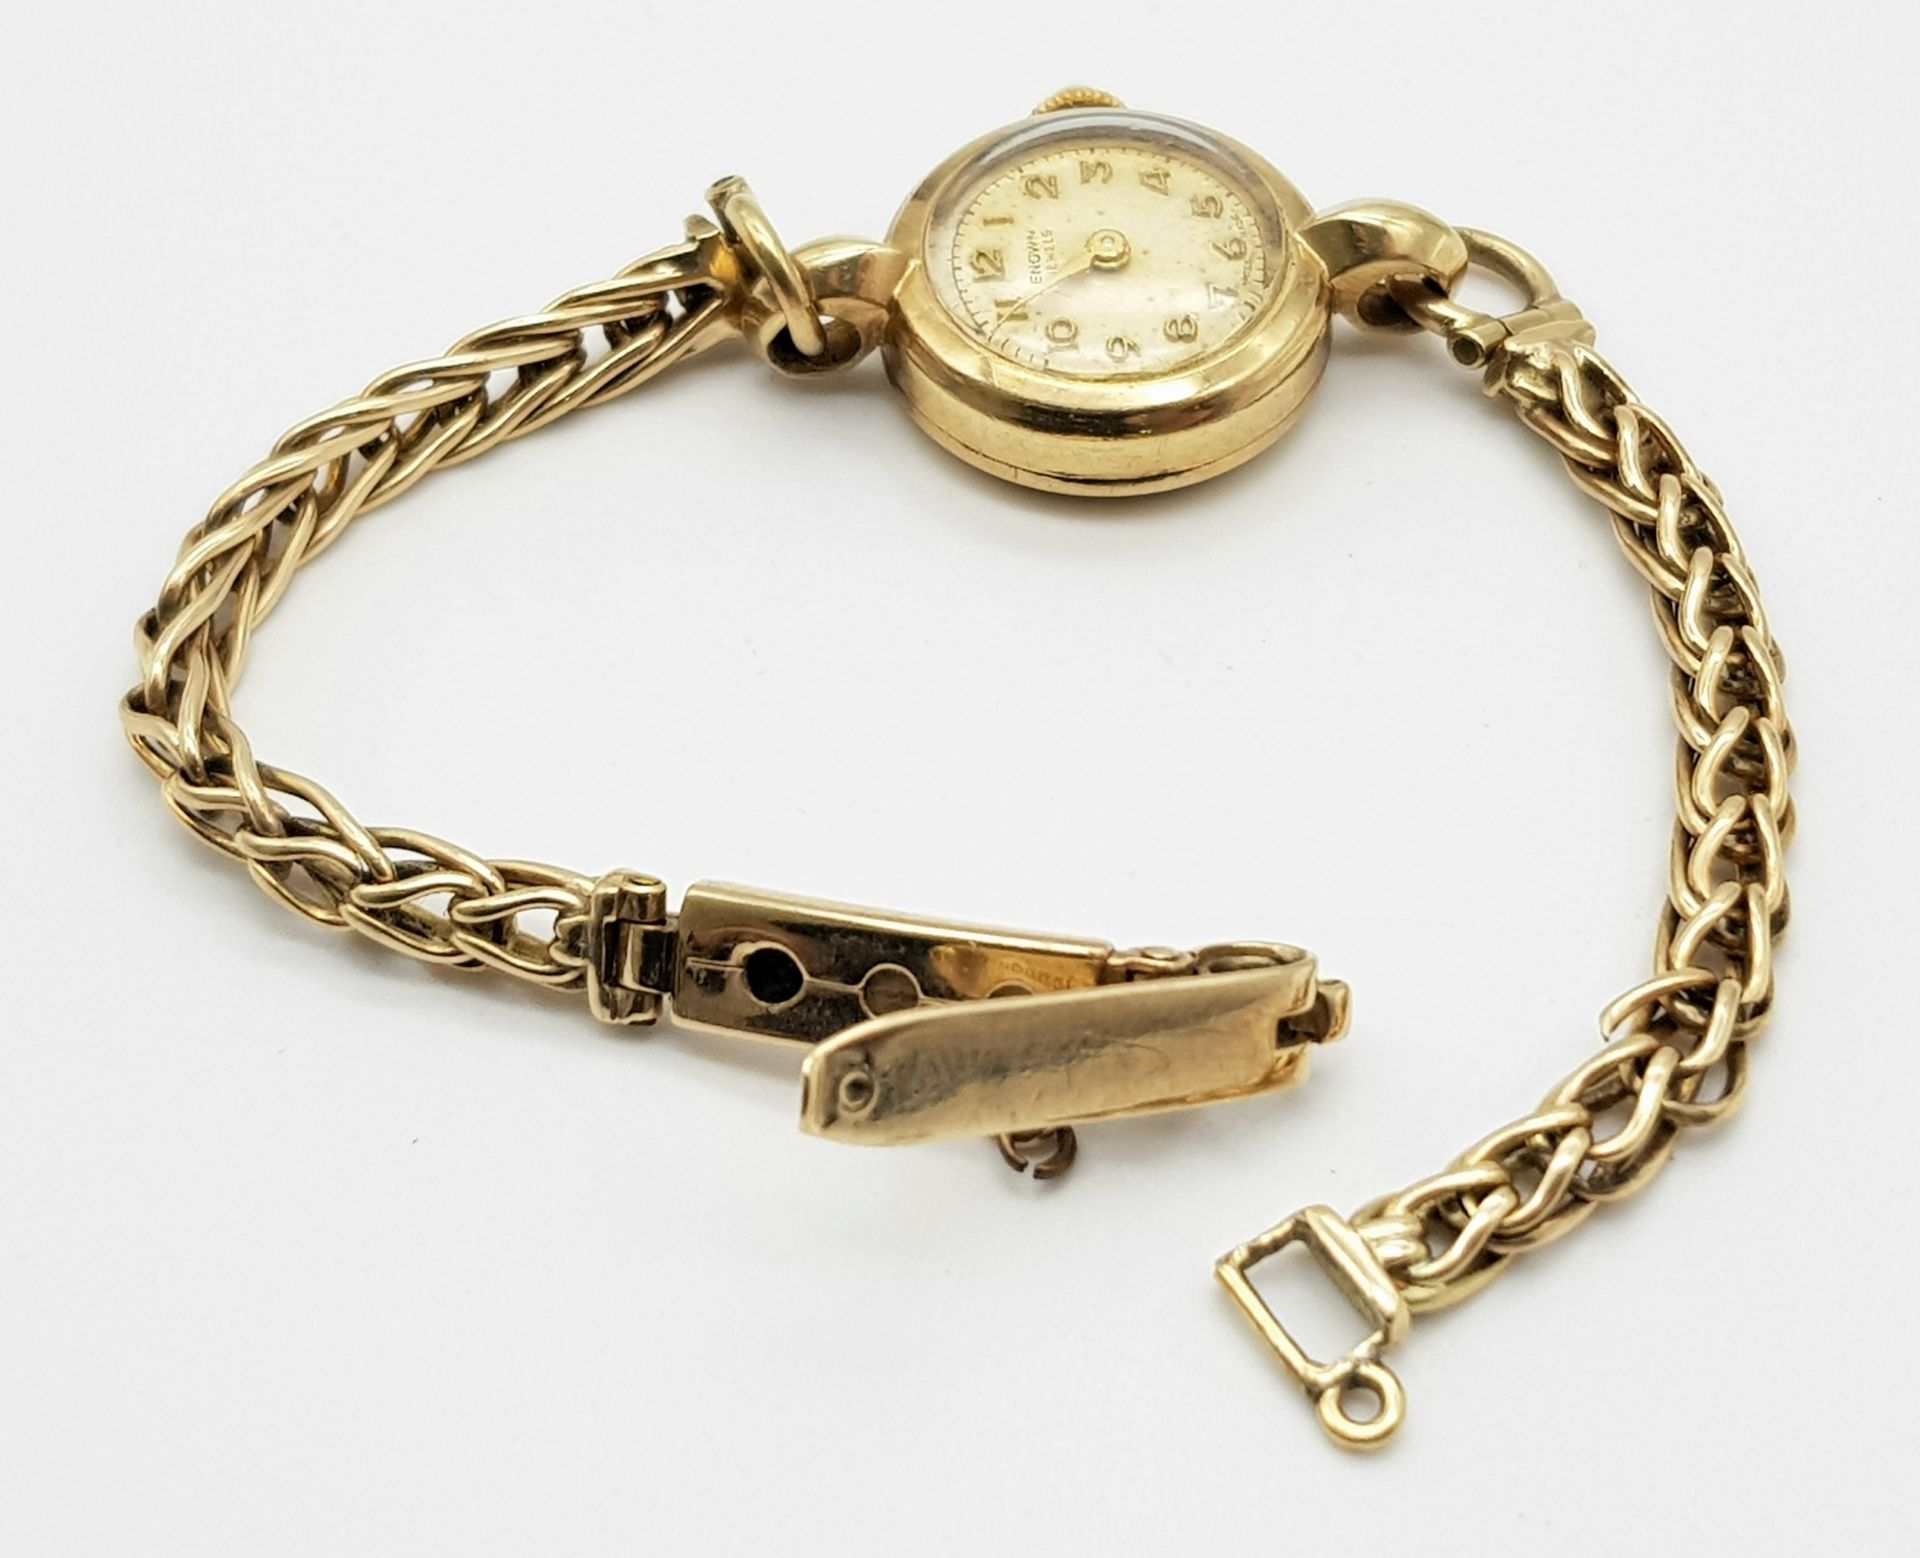 A Vintage 9K Yellow Gold Renown Ladies Watch. 9K gold bracelet and case - 18mm. Patinaed dial. - Image 4 of 6